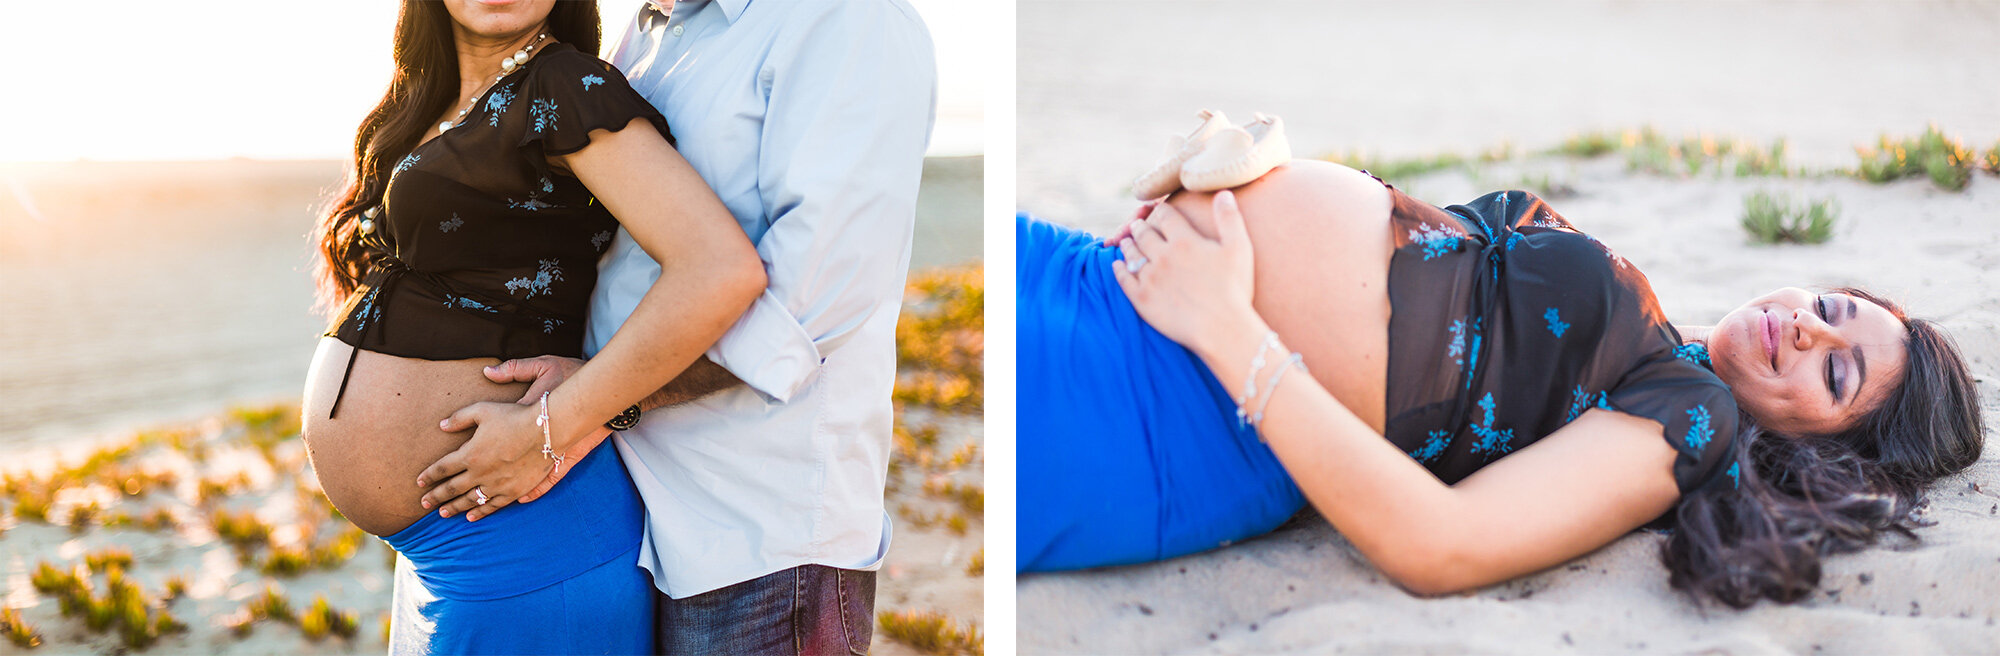 Topsfield Maternity Session Portraits | Stephen Grant Photography